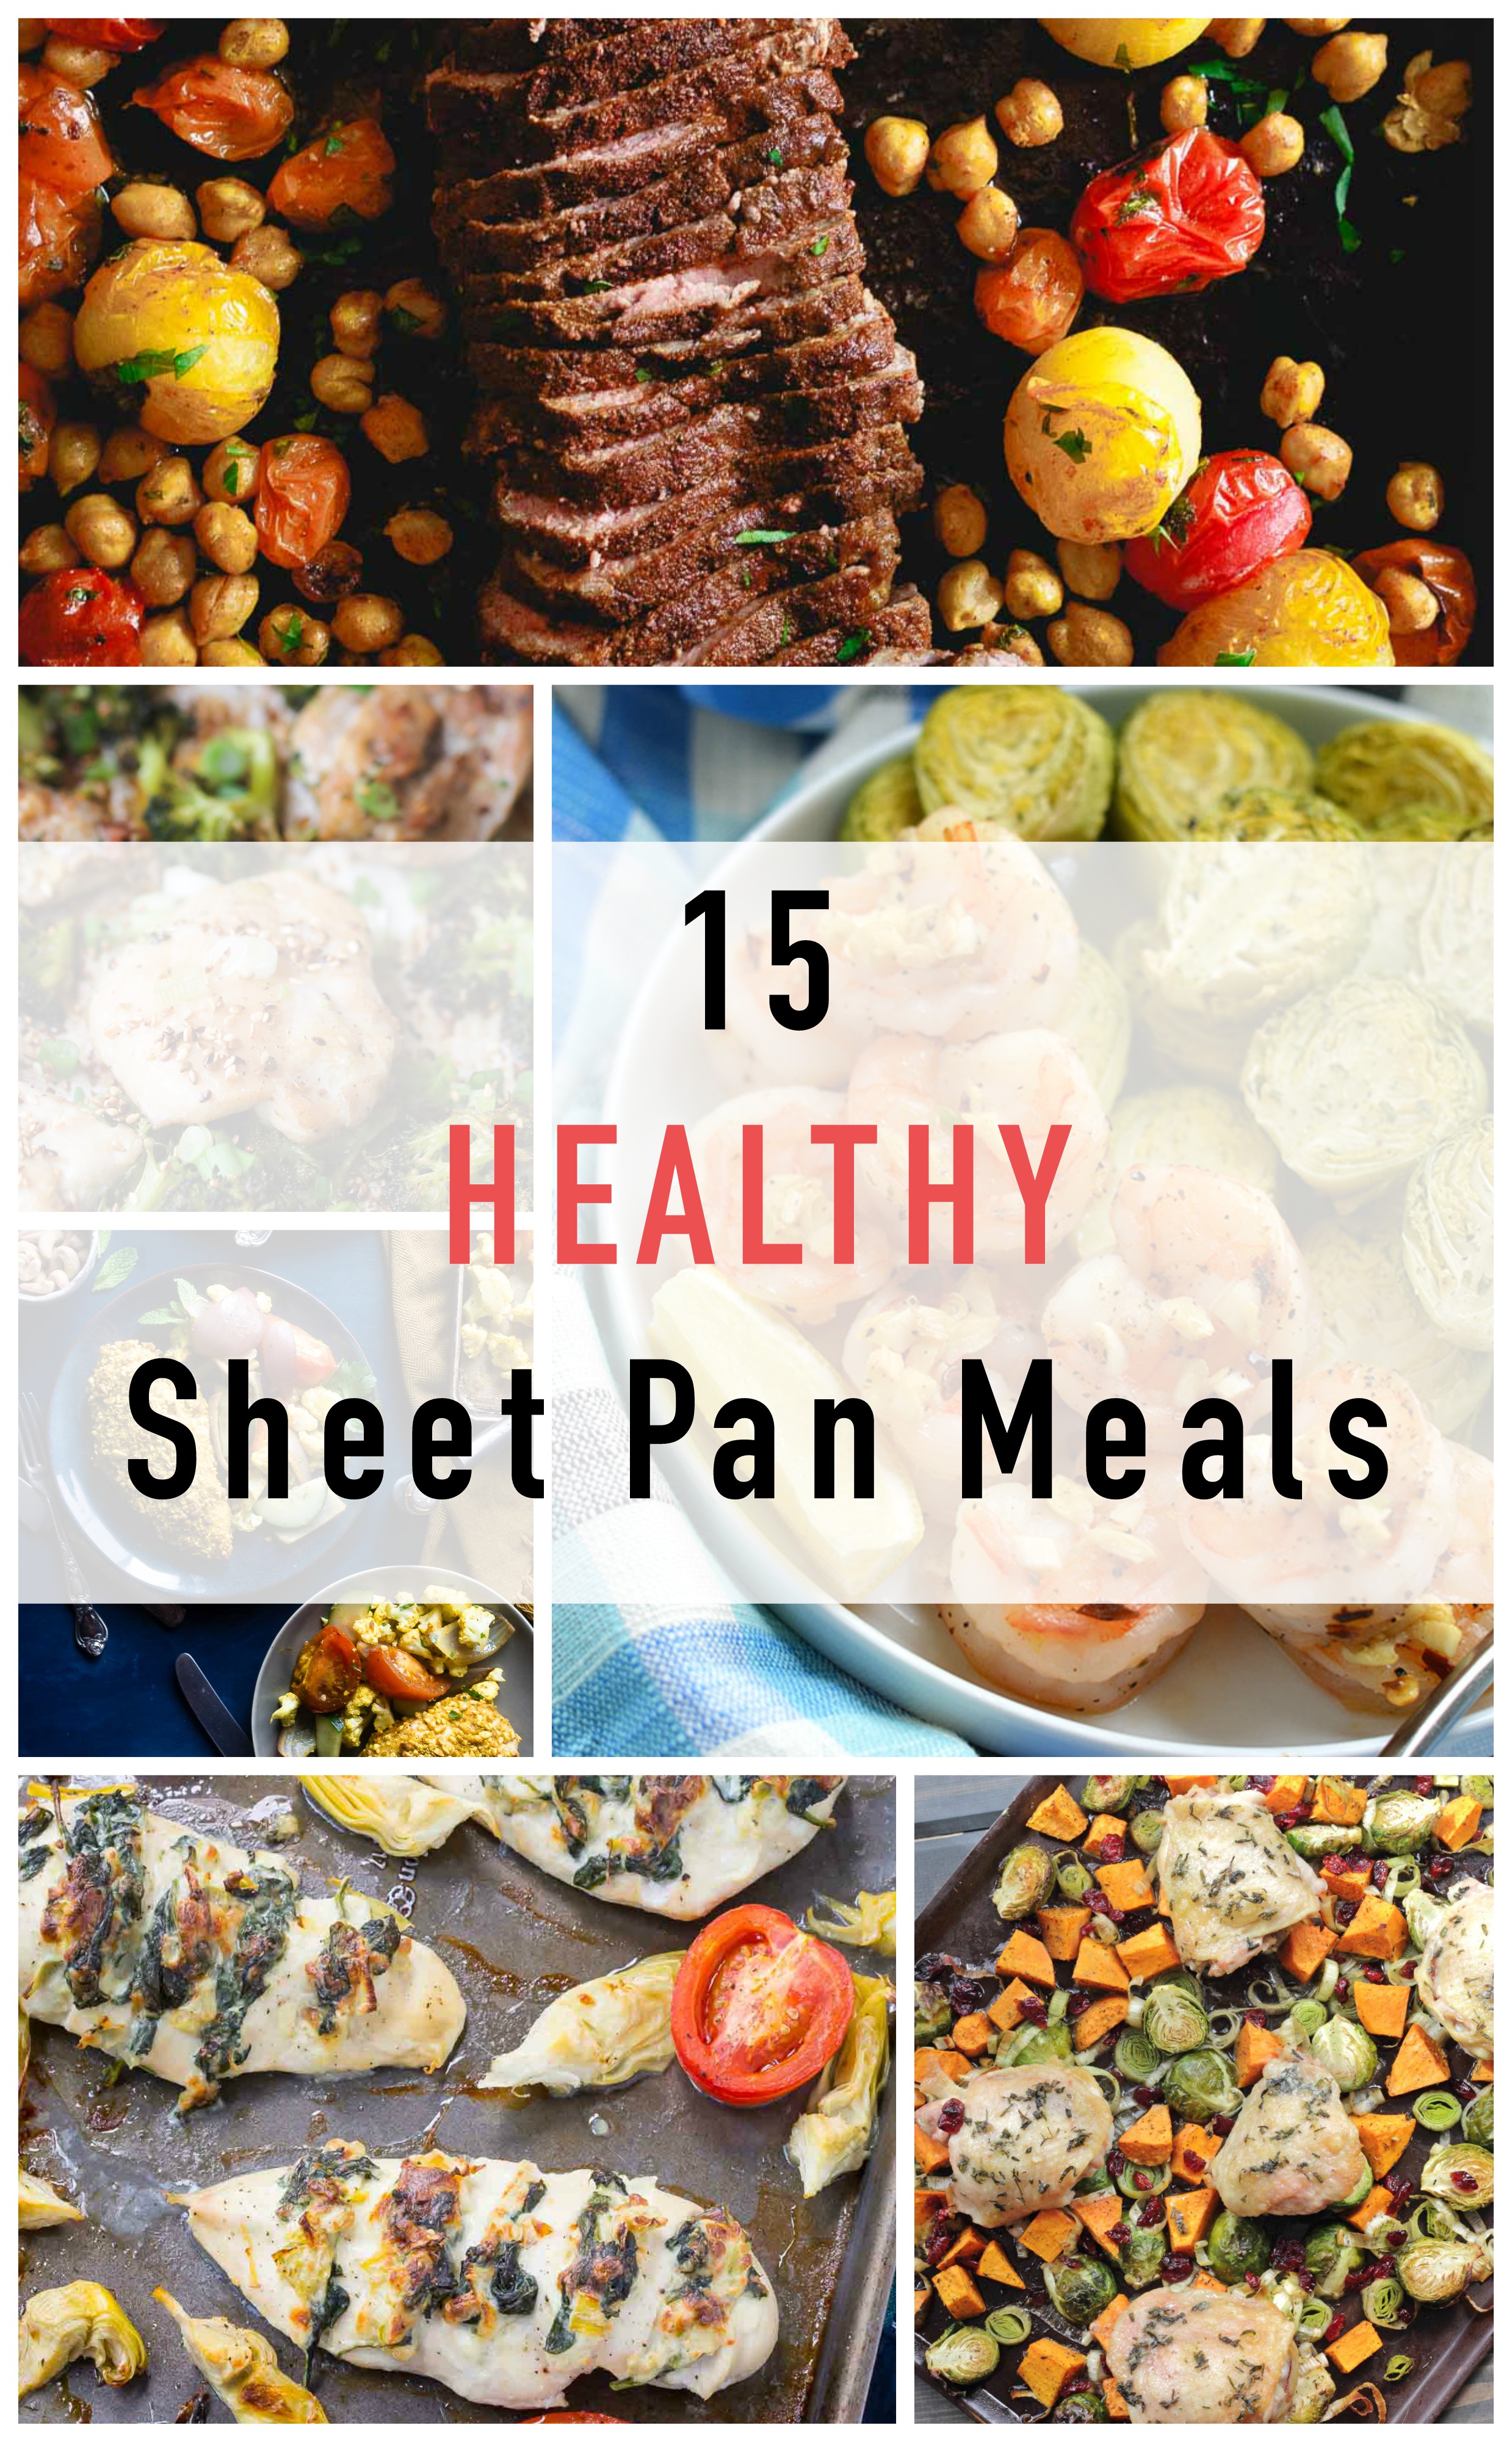 15 Healthy Sheet Pan Meal with very little ingredients and minimal cleaning.